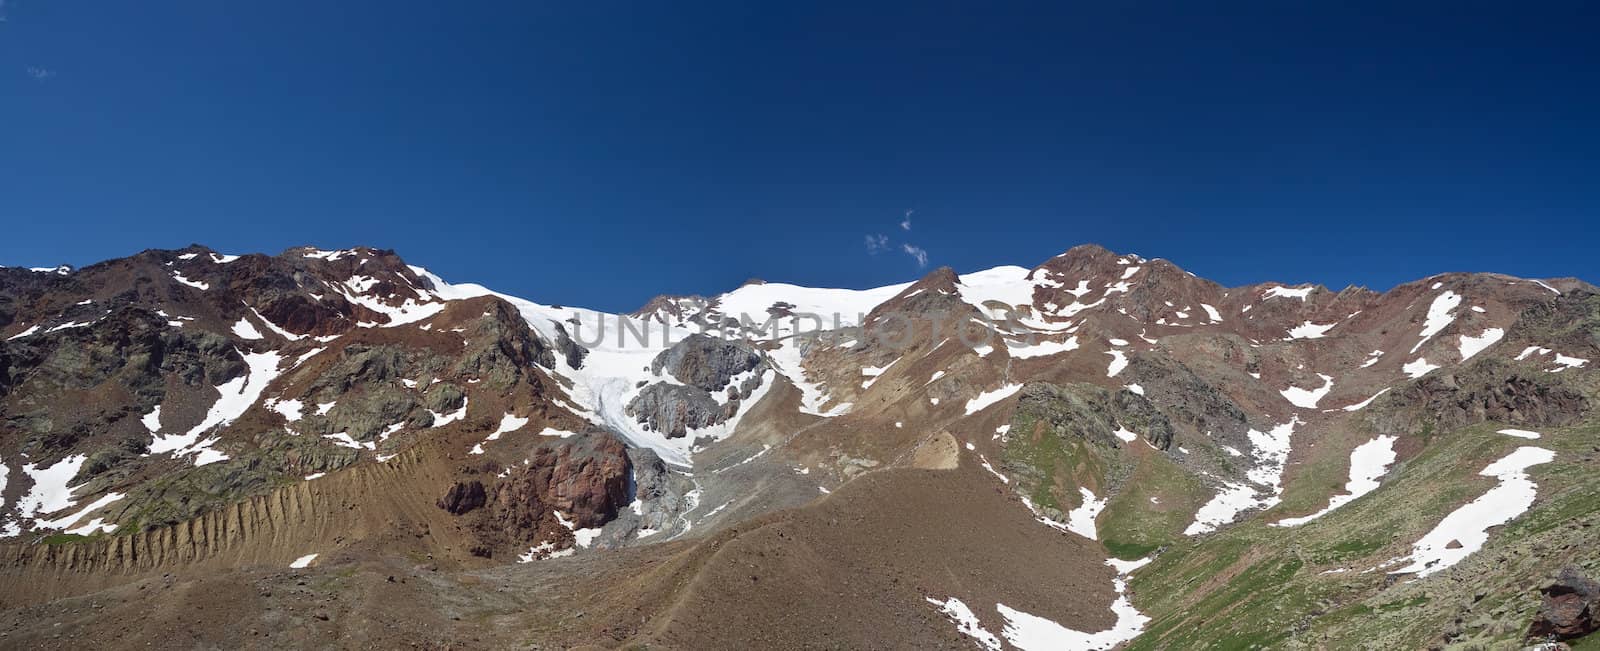 panorama of Cevedale mountain and glacier in Stelvio national park, Trentino, Italy